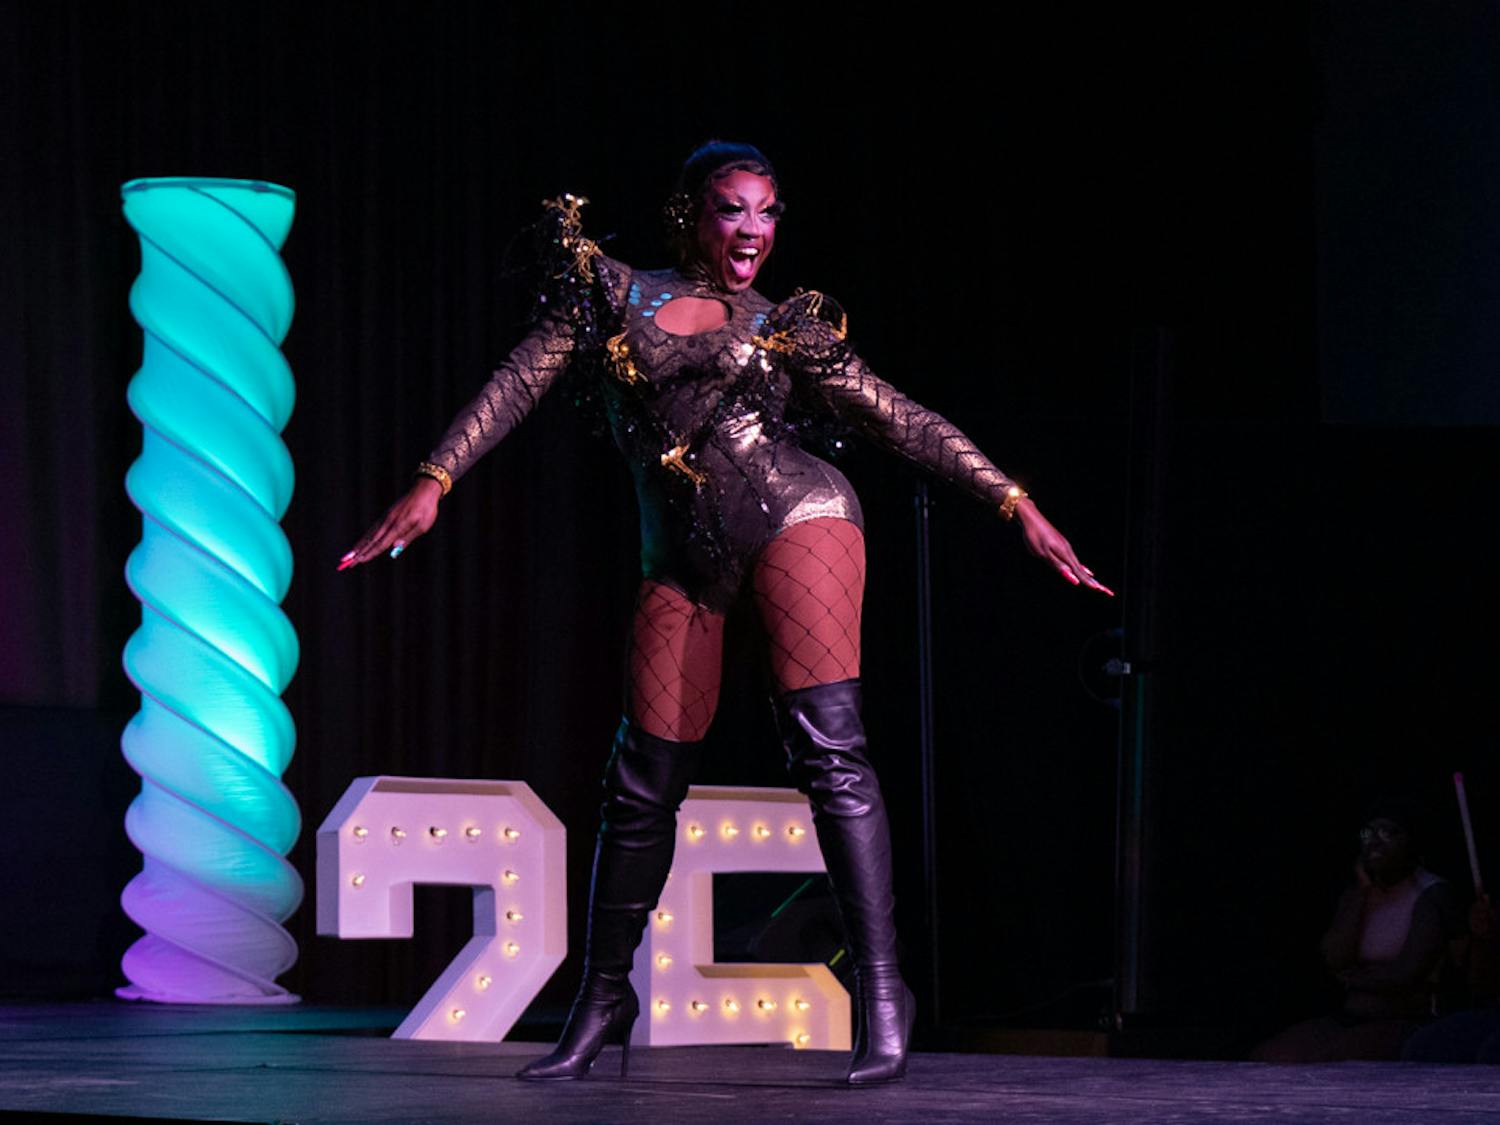 Susu Serenity dances during her performance on April 12, 2023. The Birdcage drag show event was celebrating its 25th anniversary.